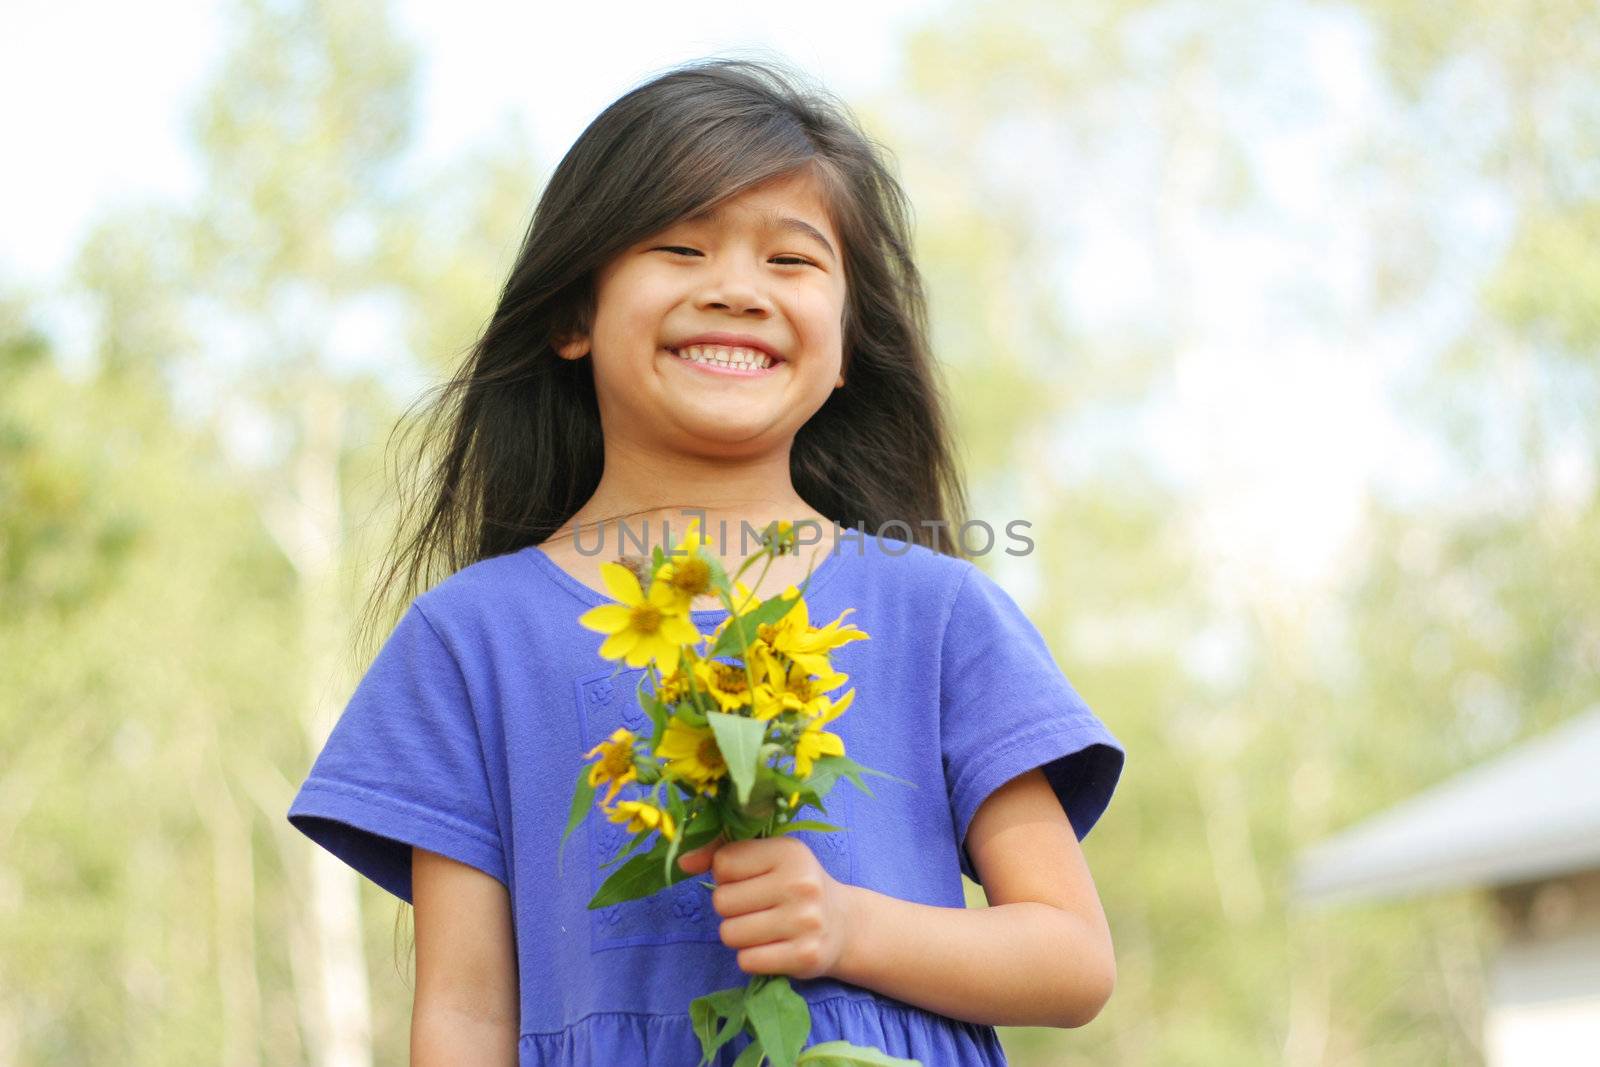 Adorable six year old Girl holding bouquet of sunflowers